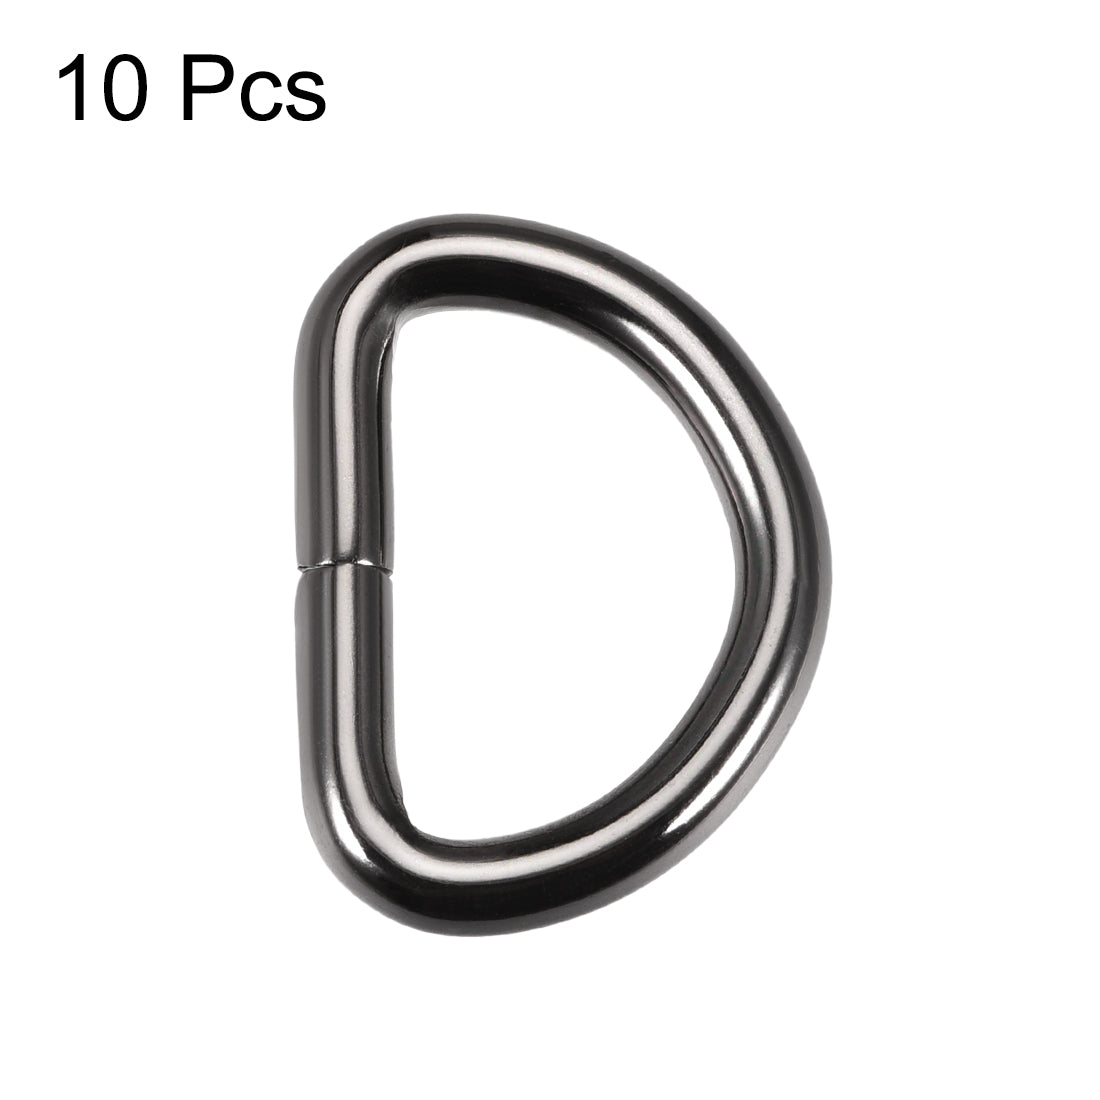 uxcell Uxcell 10 Pcs D Ring Buckle 1 Inch Metal Semi-Circular D-Rings Black for Hardware Bags Belts Craft DIY Accessories